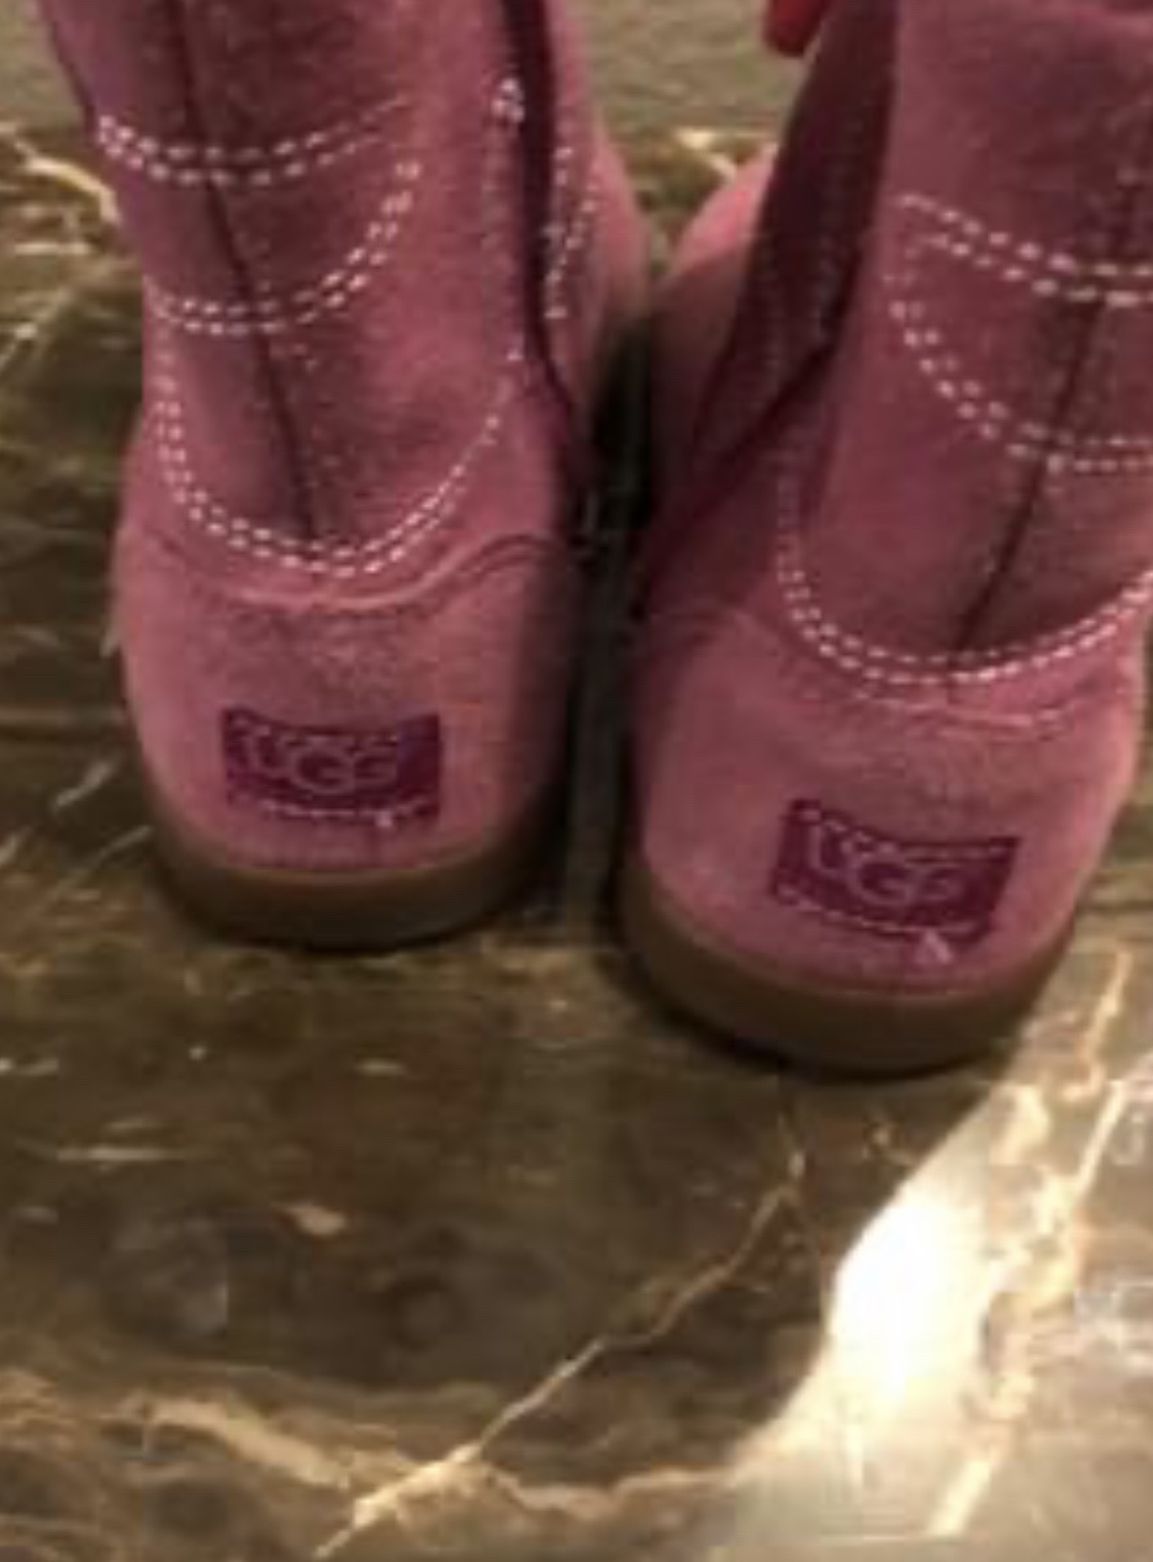 Ugg Boots For Kids